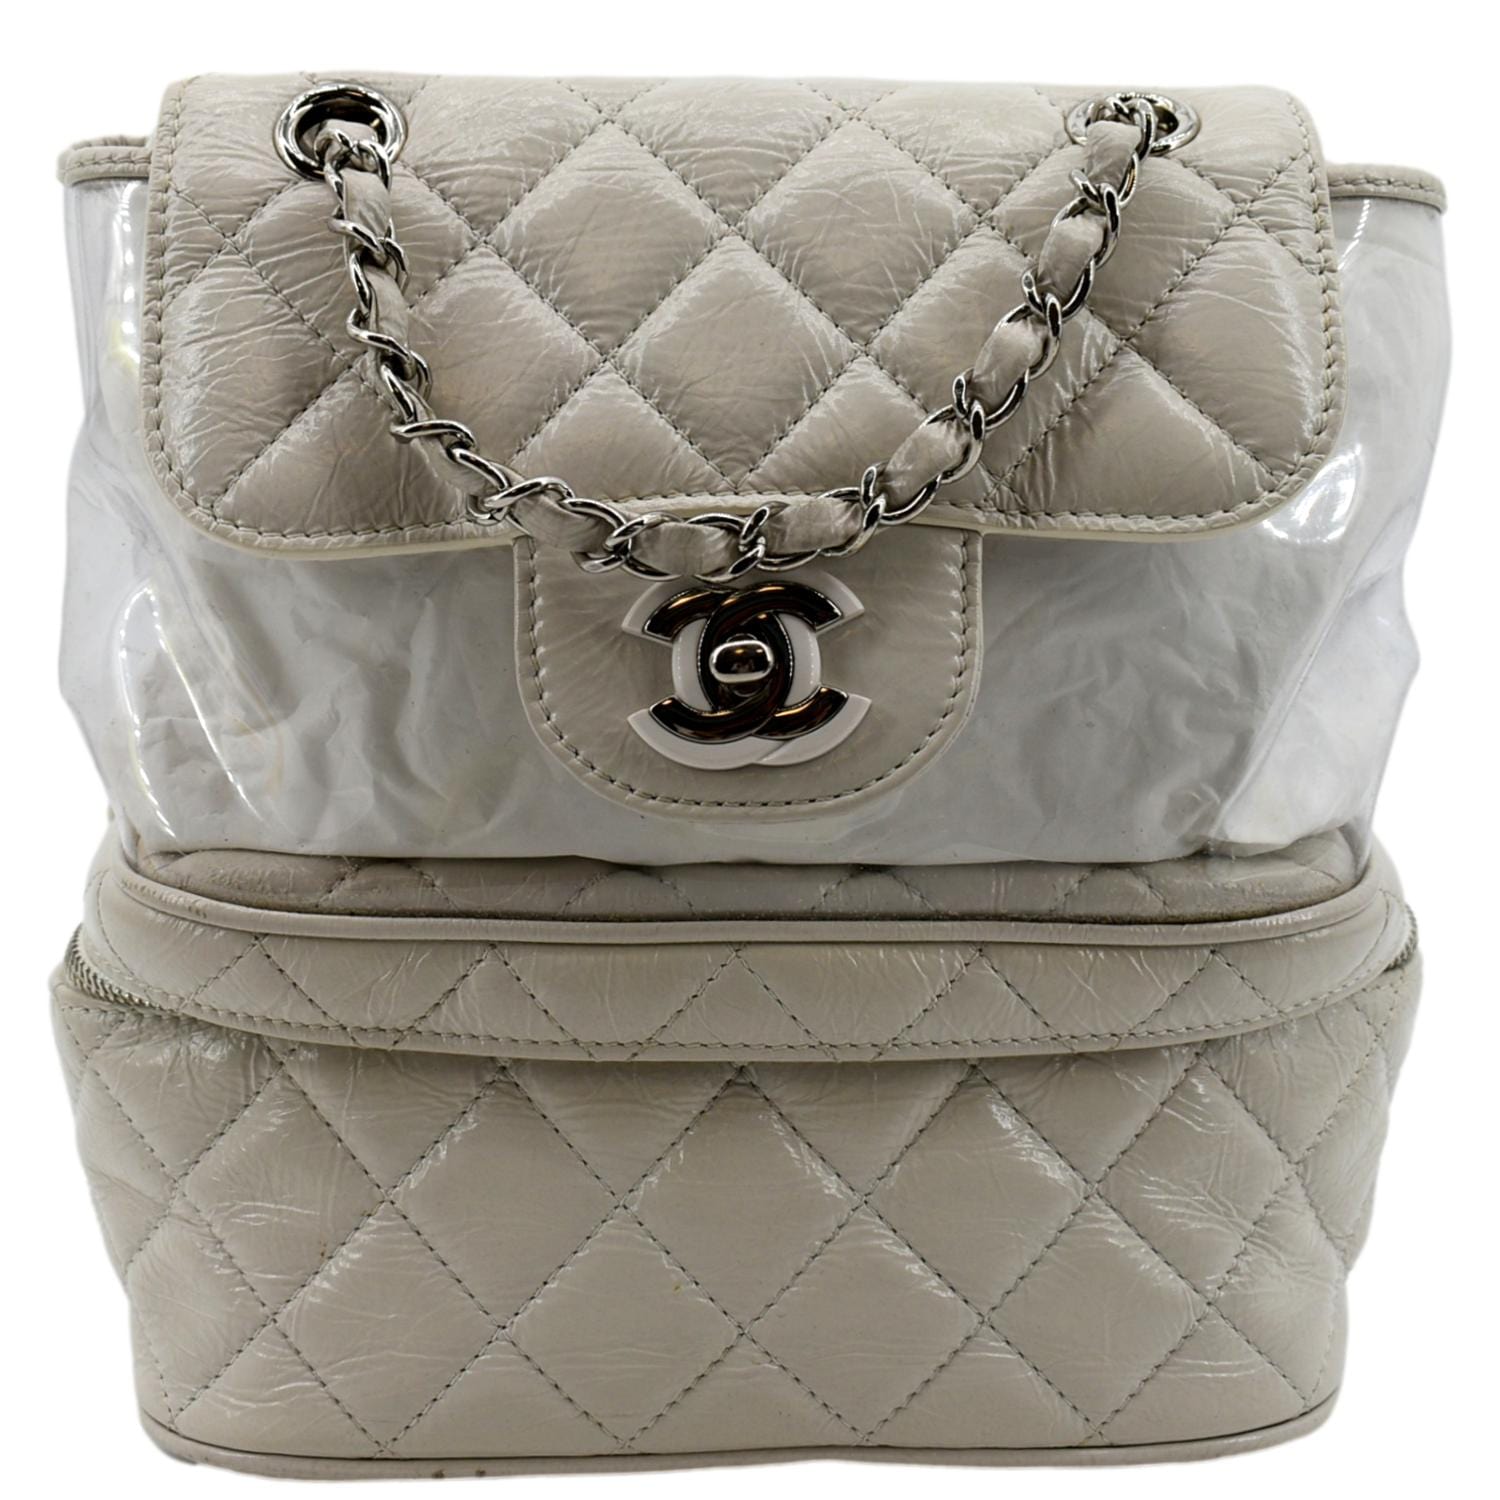 CHANEL PVC Exterior Bags & Handbags for Women, Authenticity Guaranteed